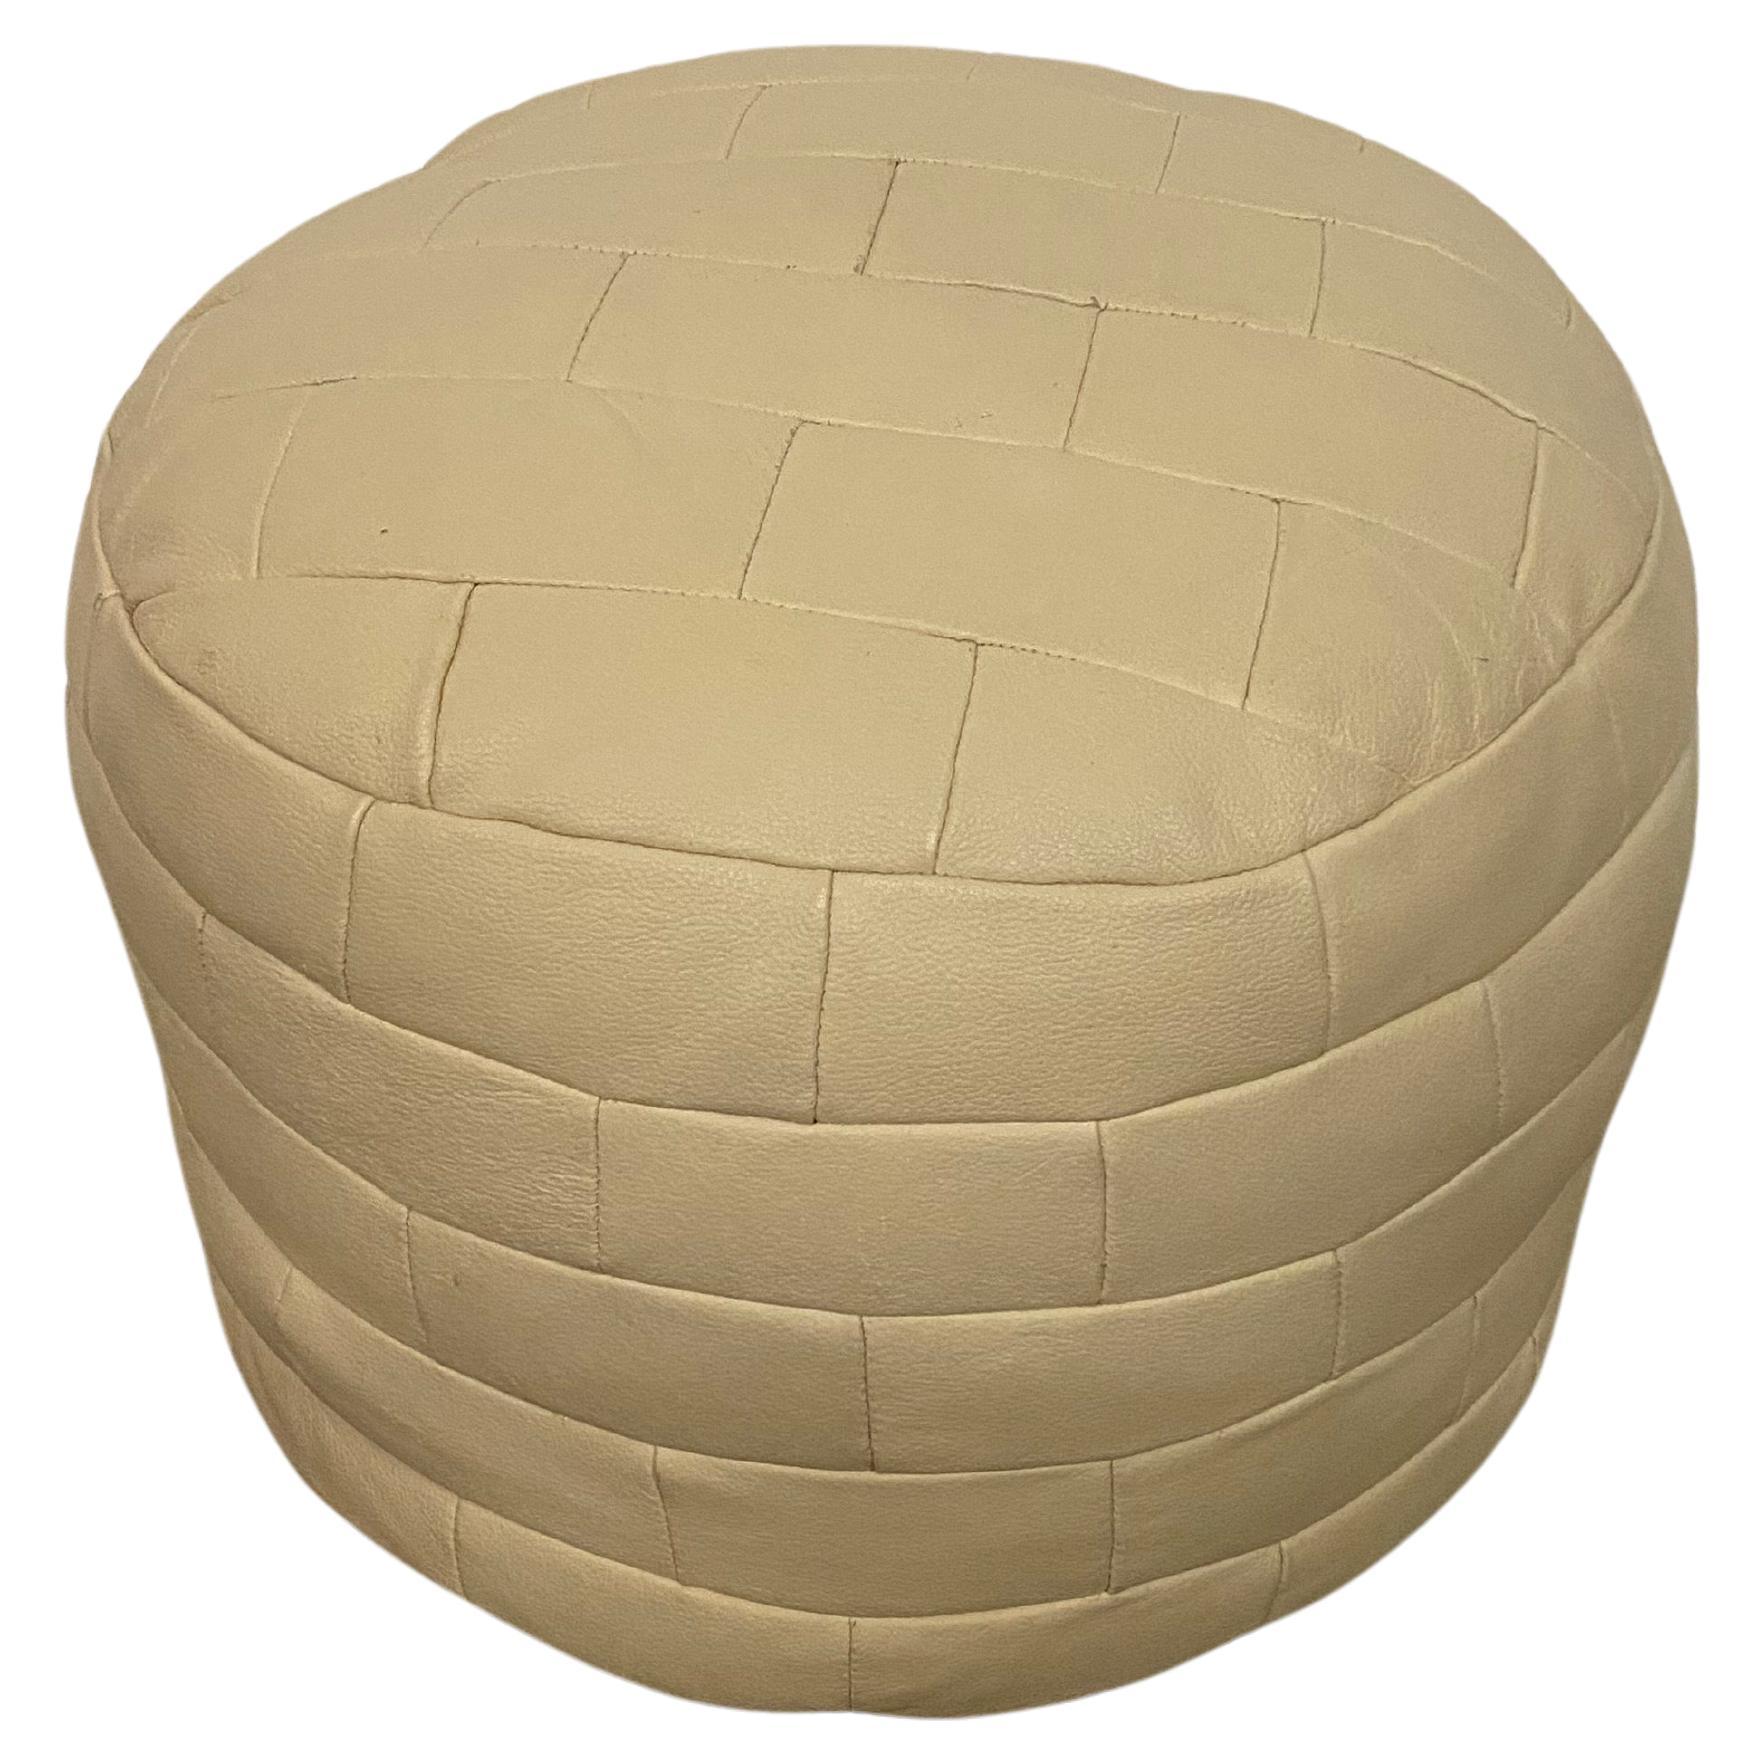 Pouf or Ottoman Leather Patchwork by De Sede in Beige or Off-White, 1970s For Sale